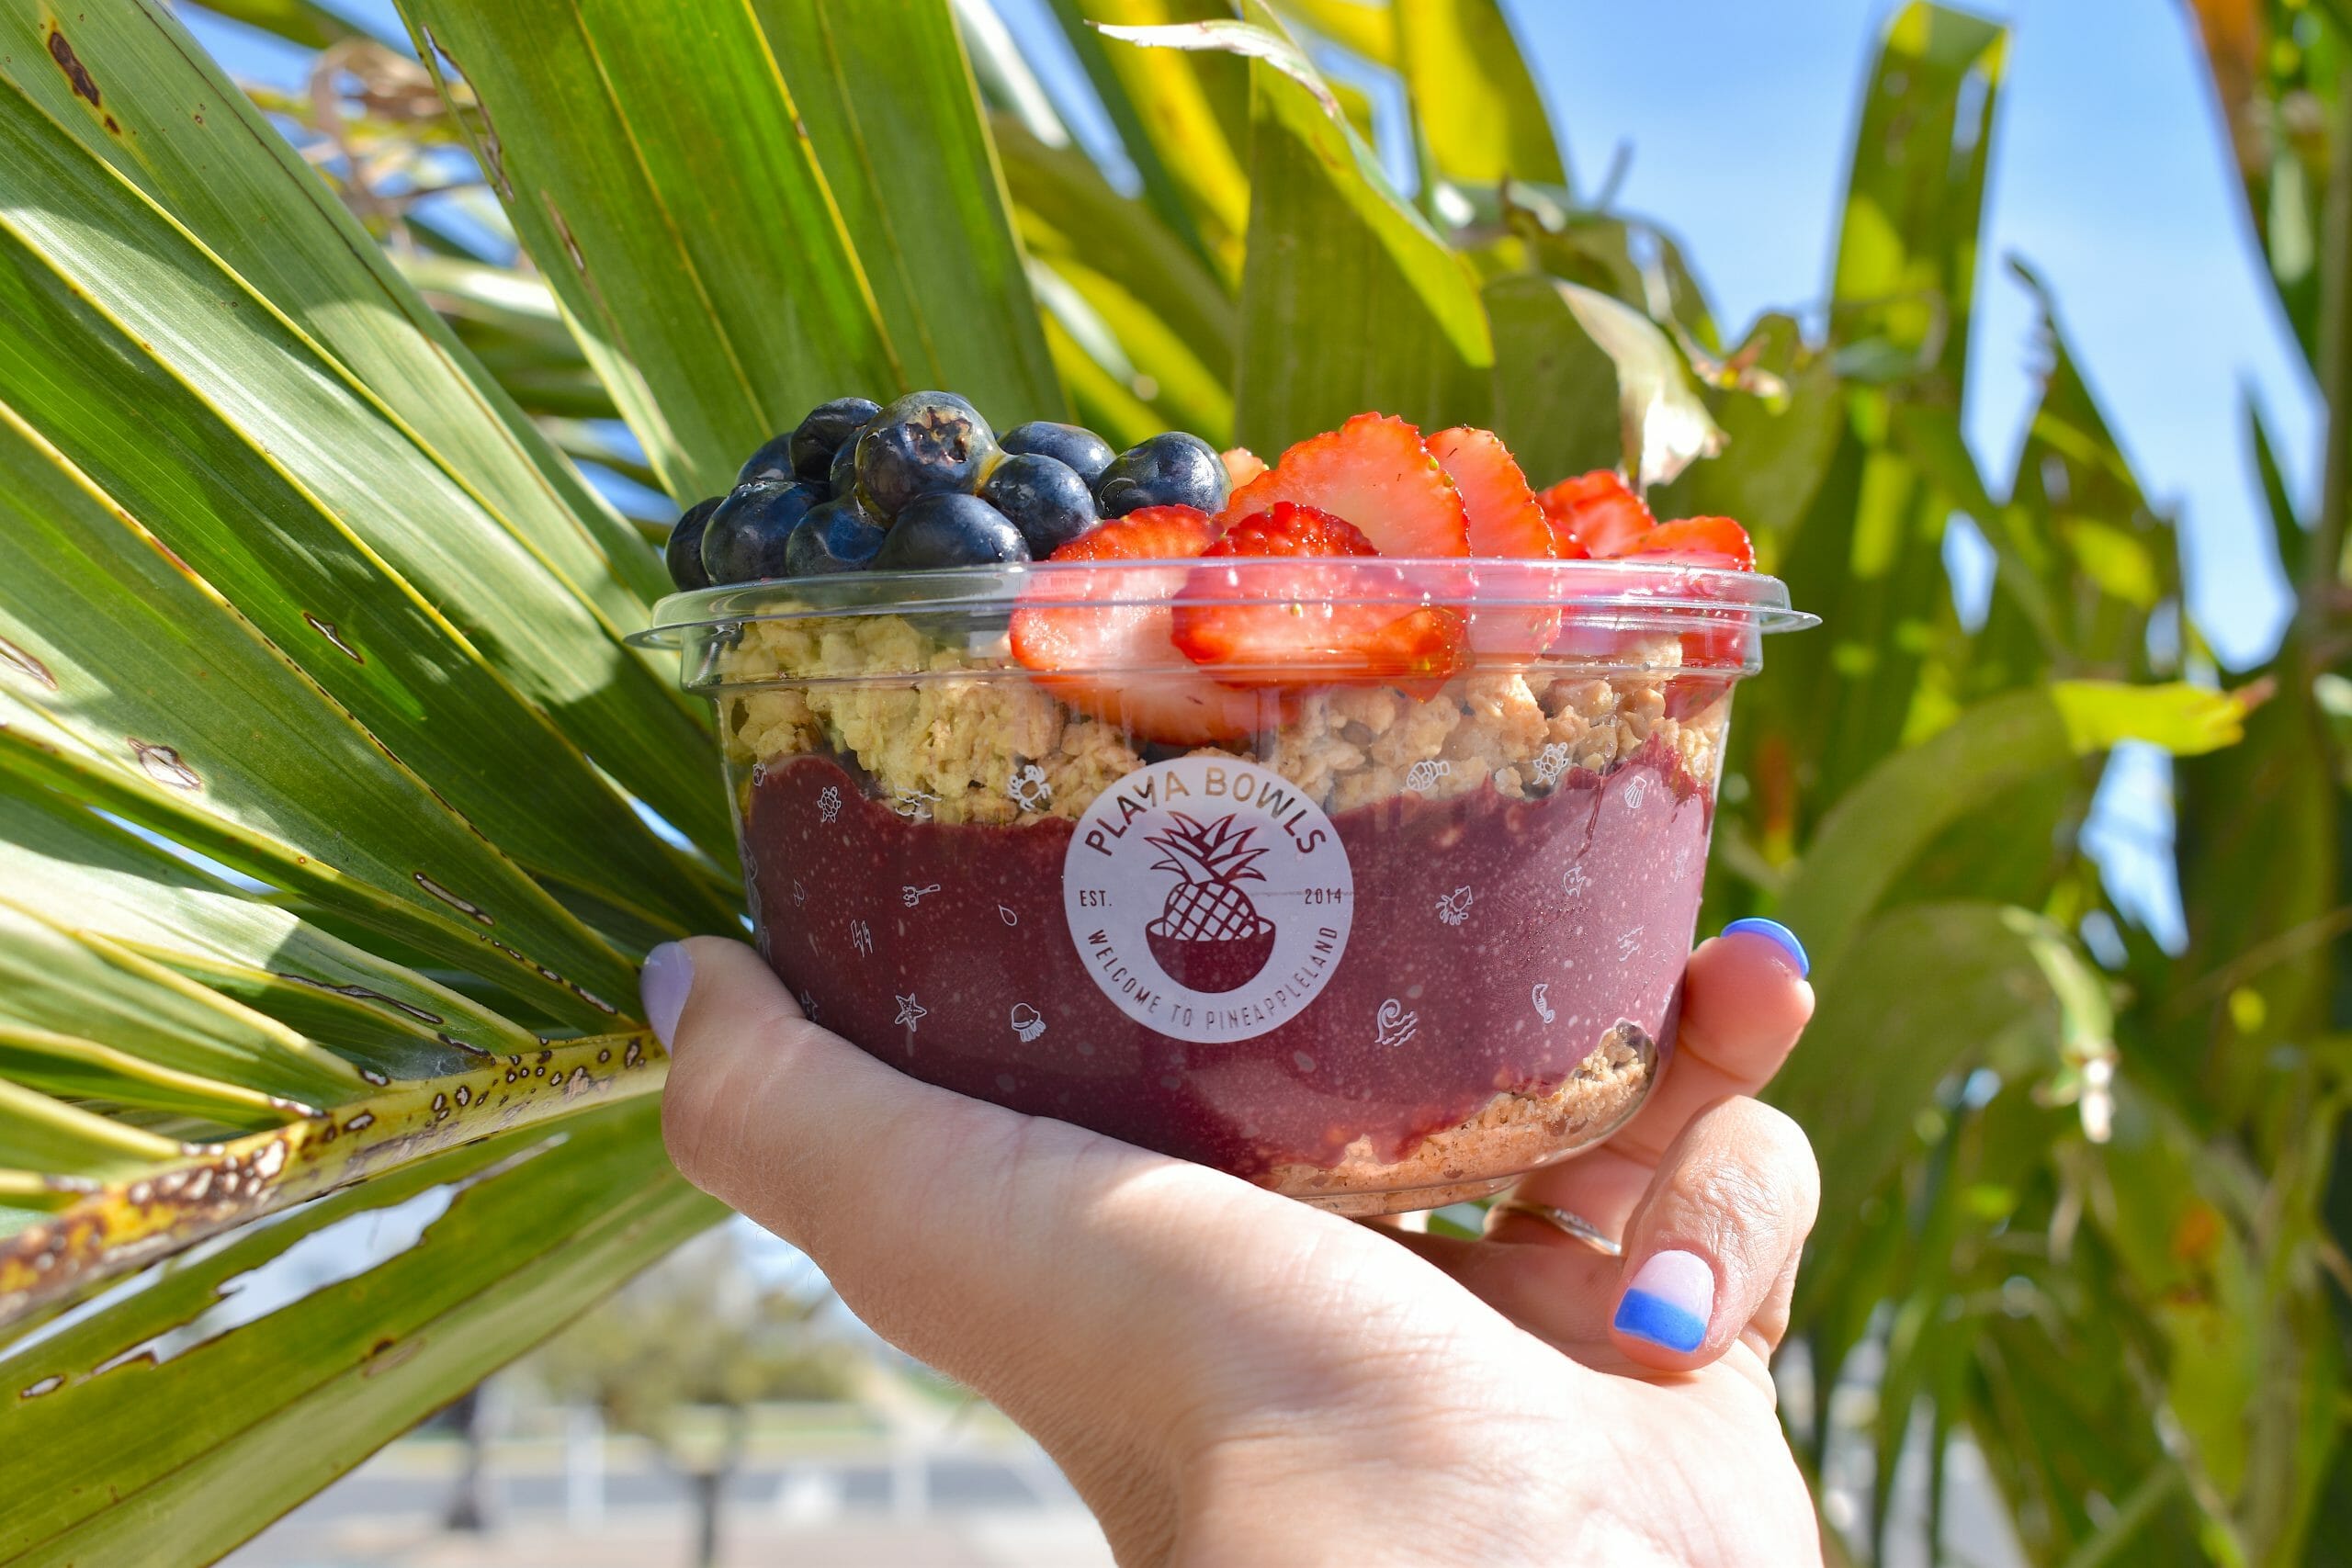 All About Açai From The Açai Bowl Experts: Our Founders